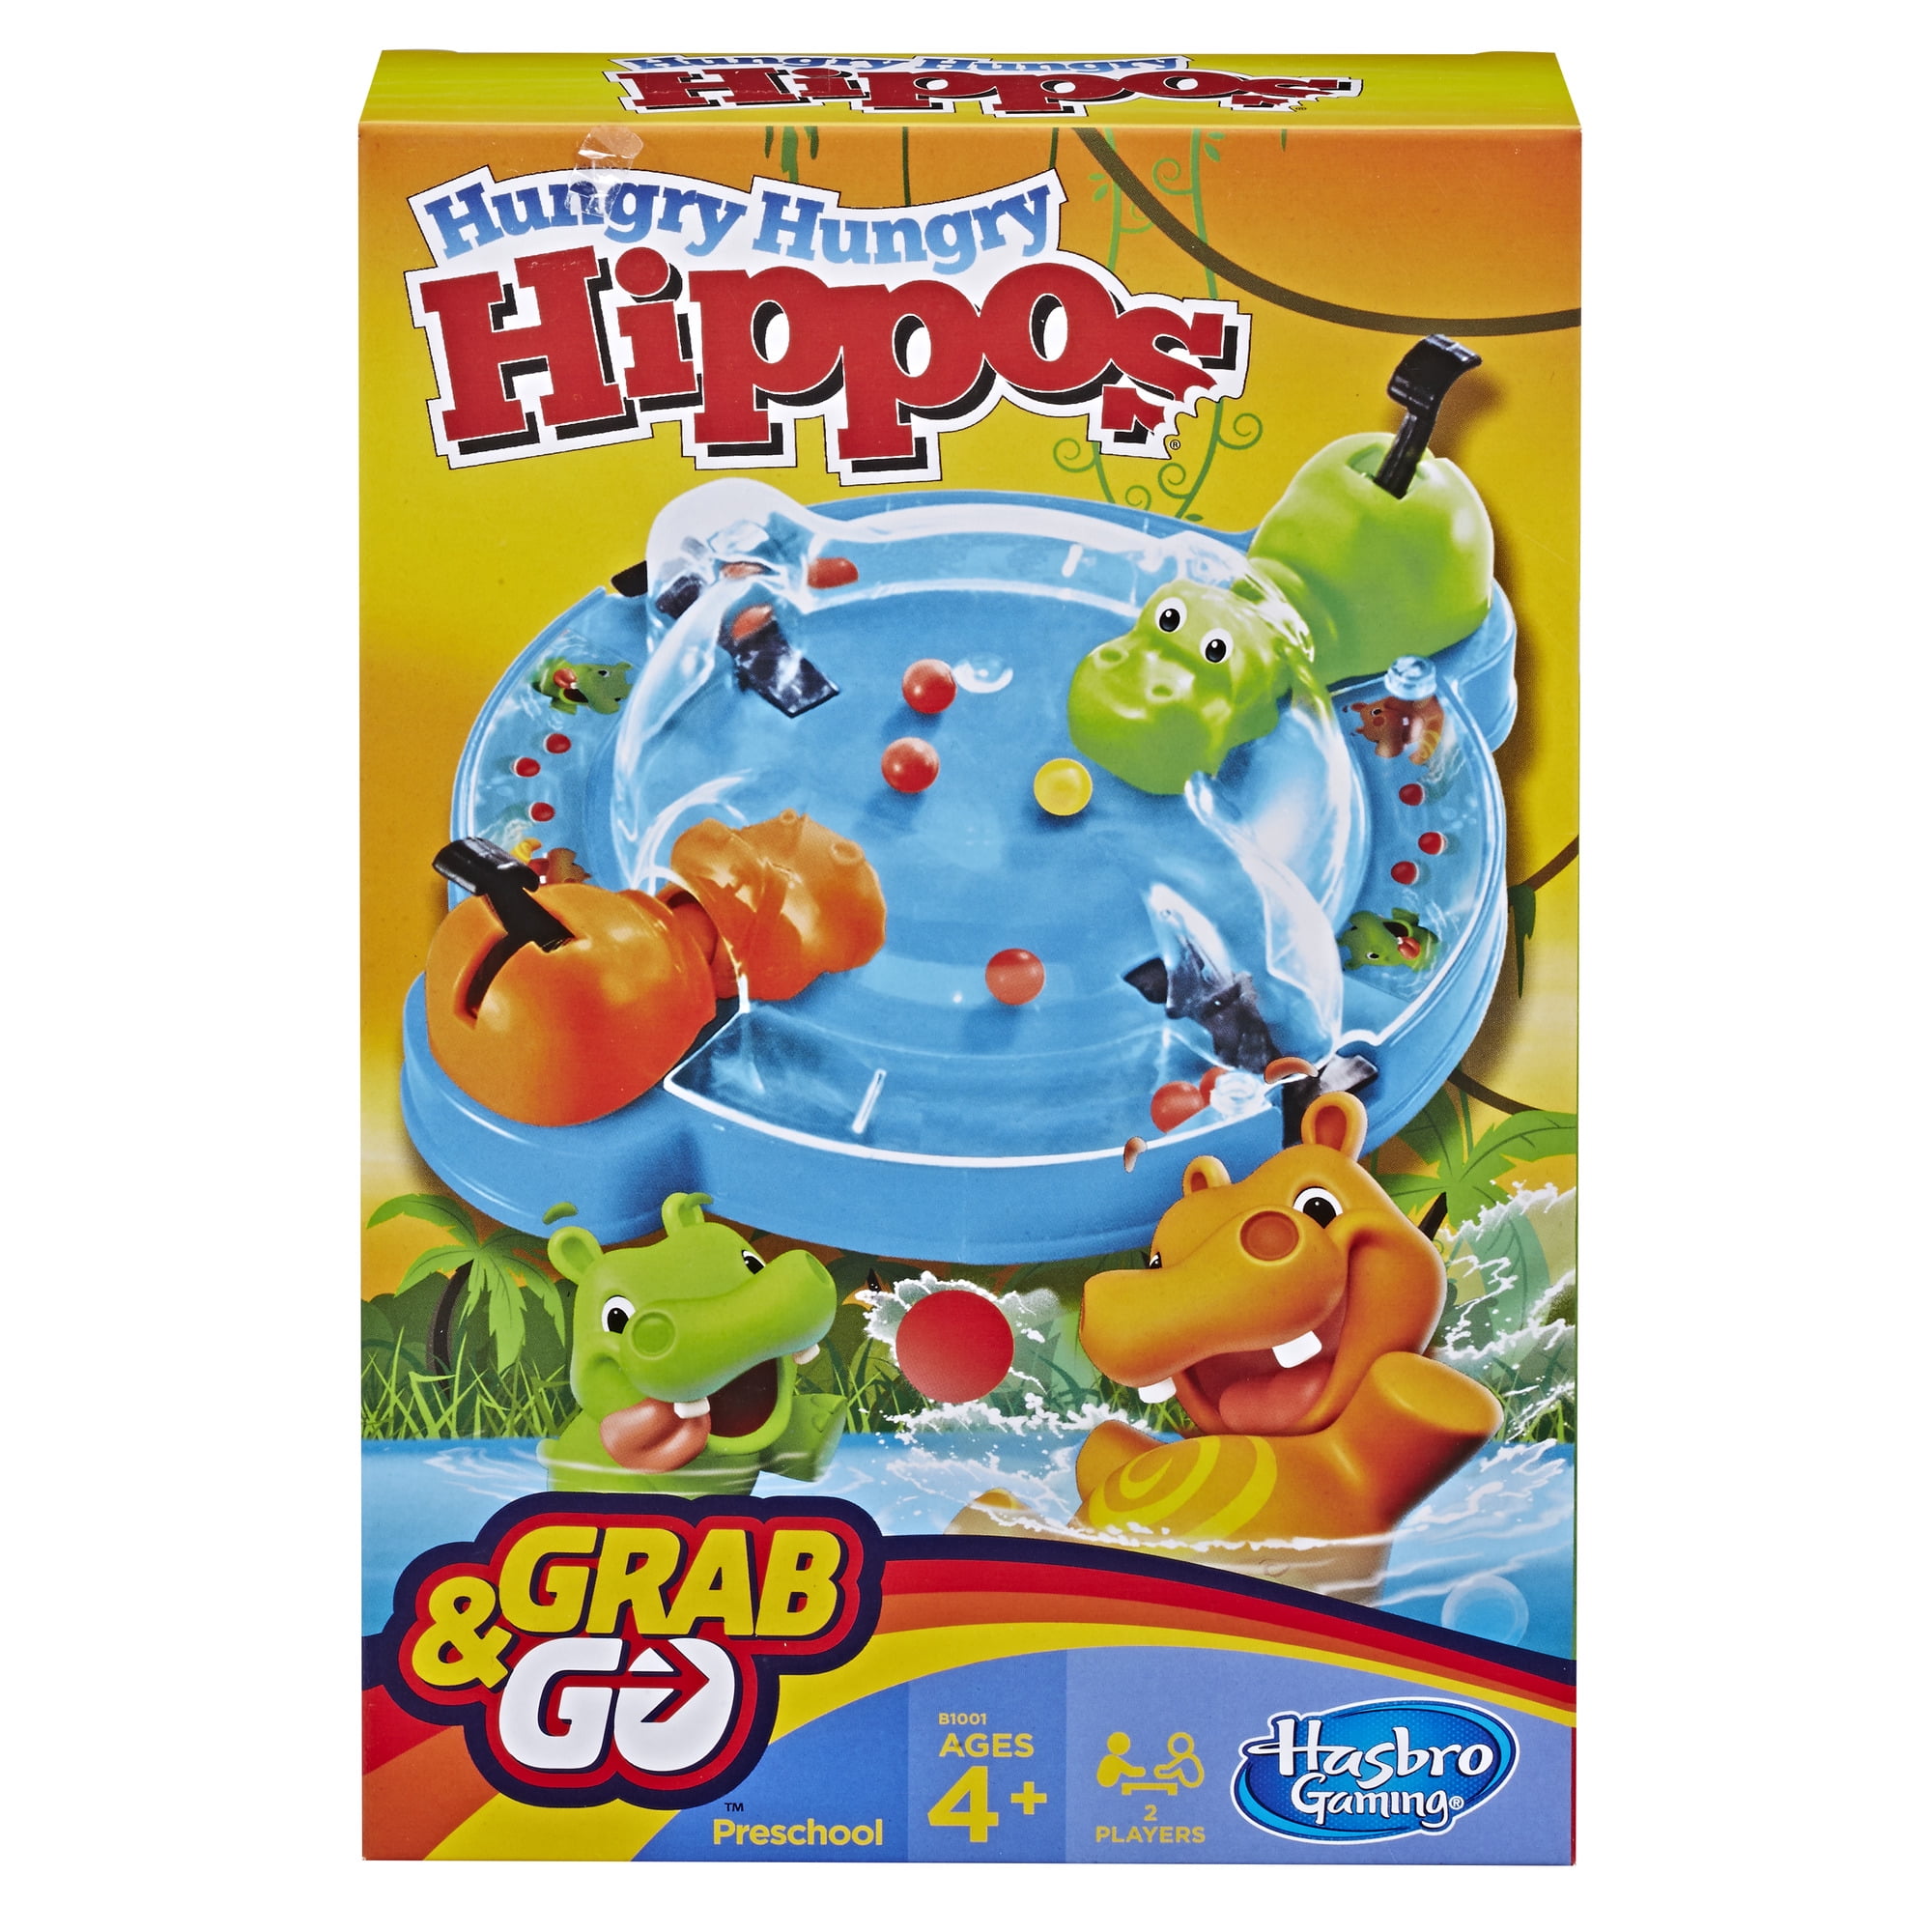 Hungry Hungry Hippos Family Classic Game Board and Accessories 